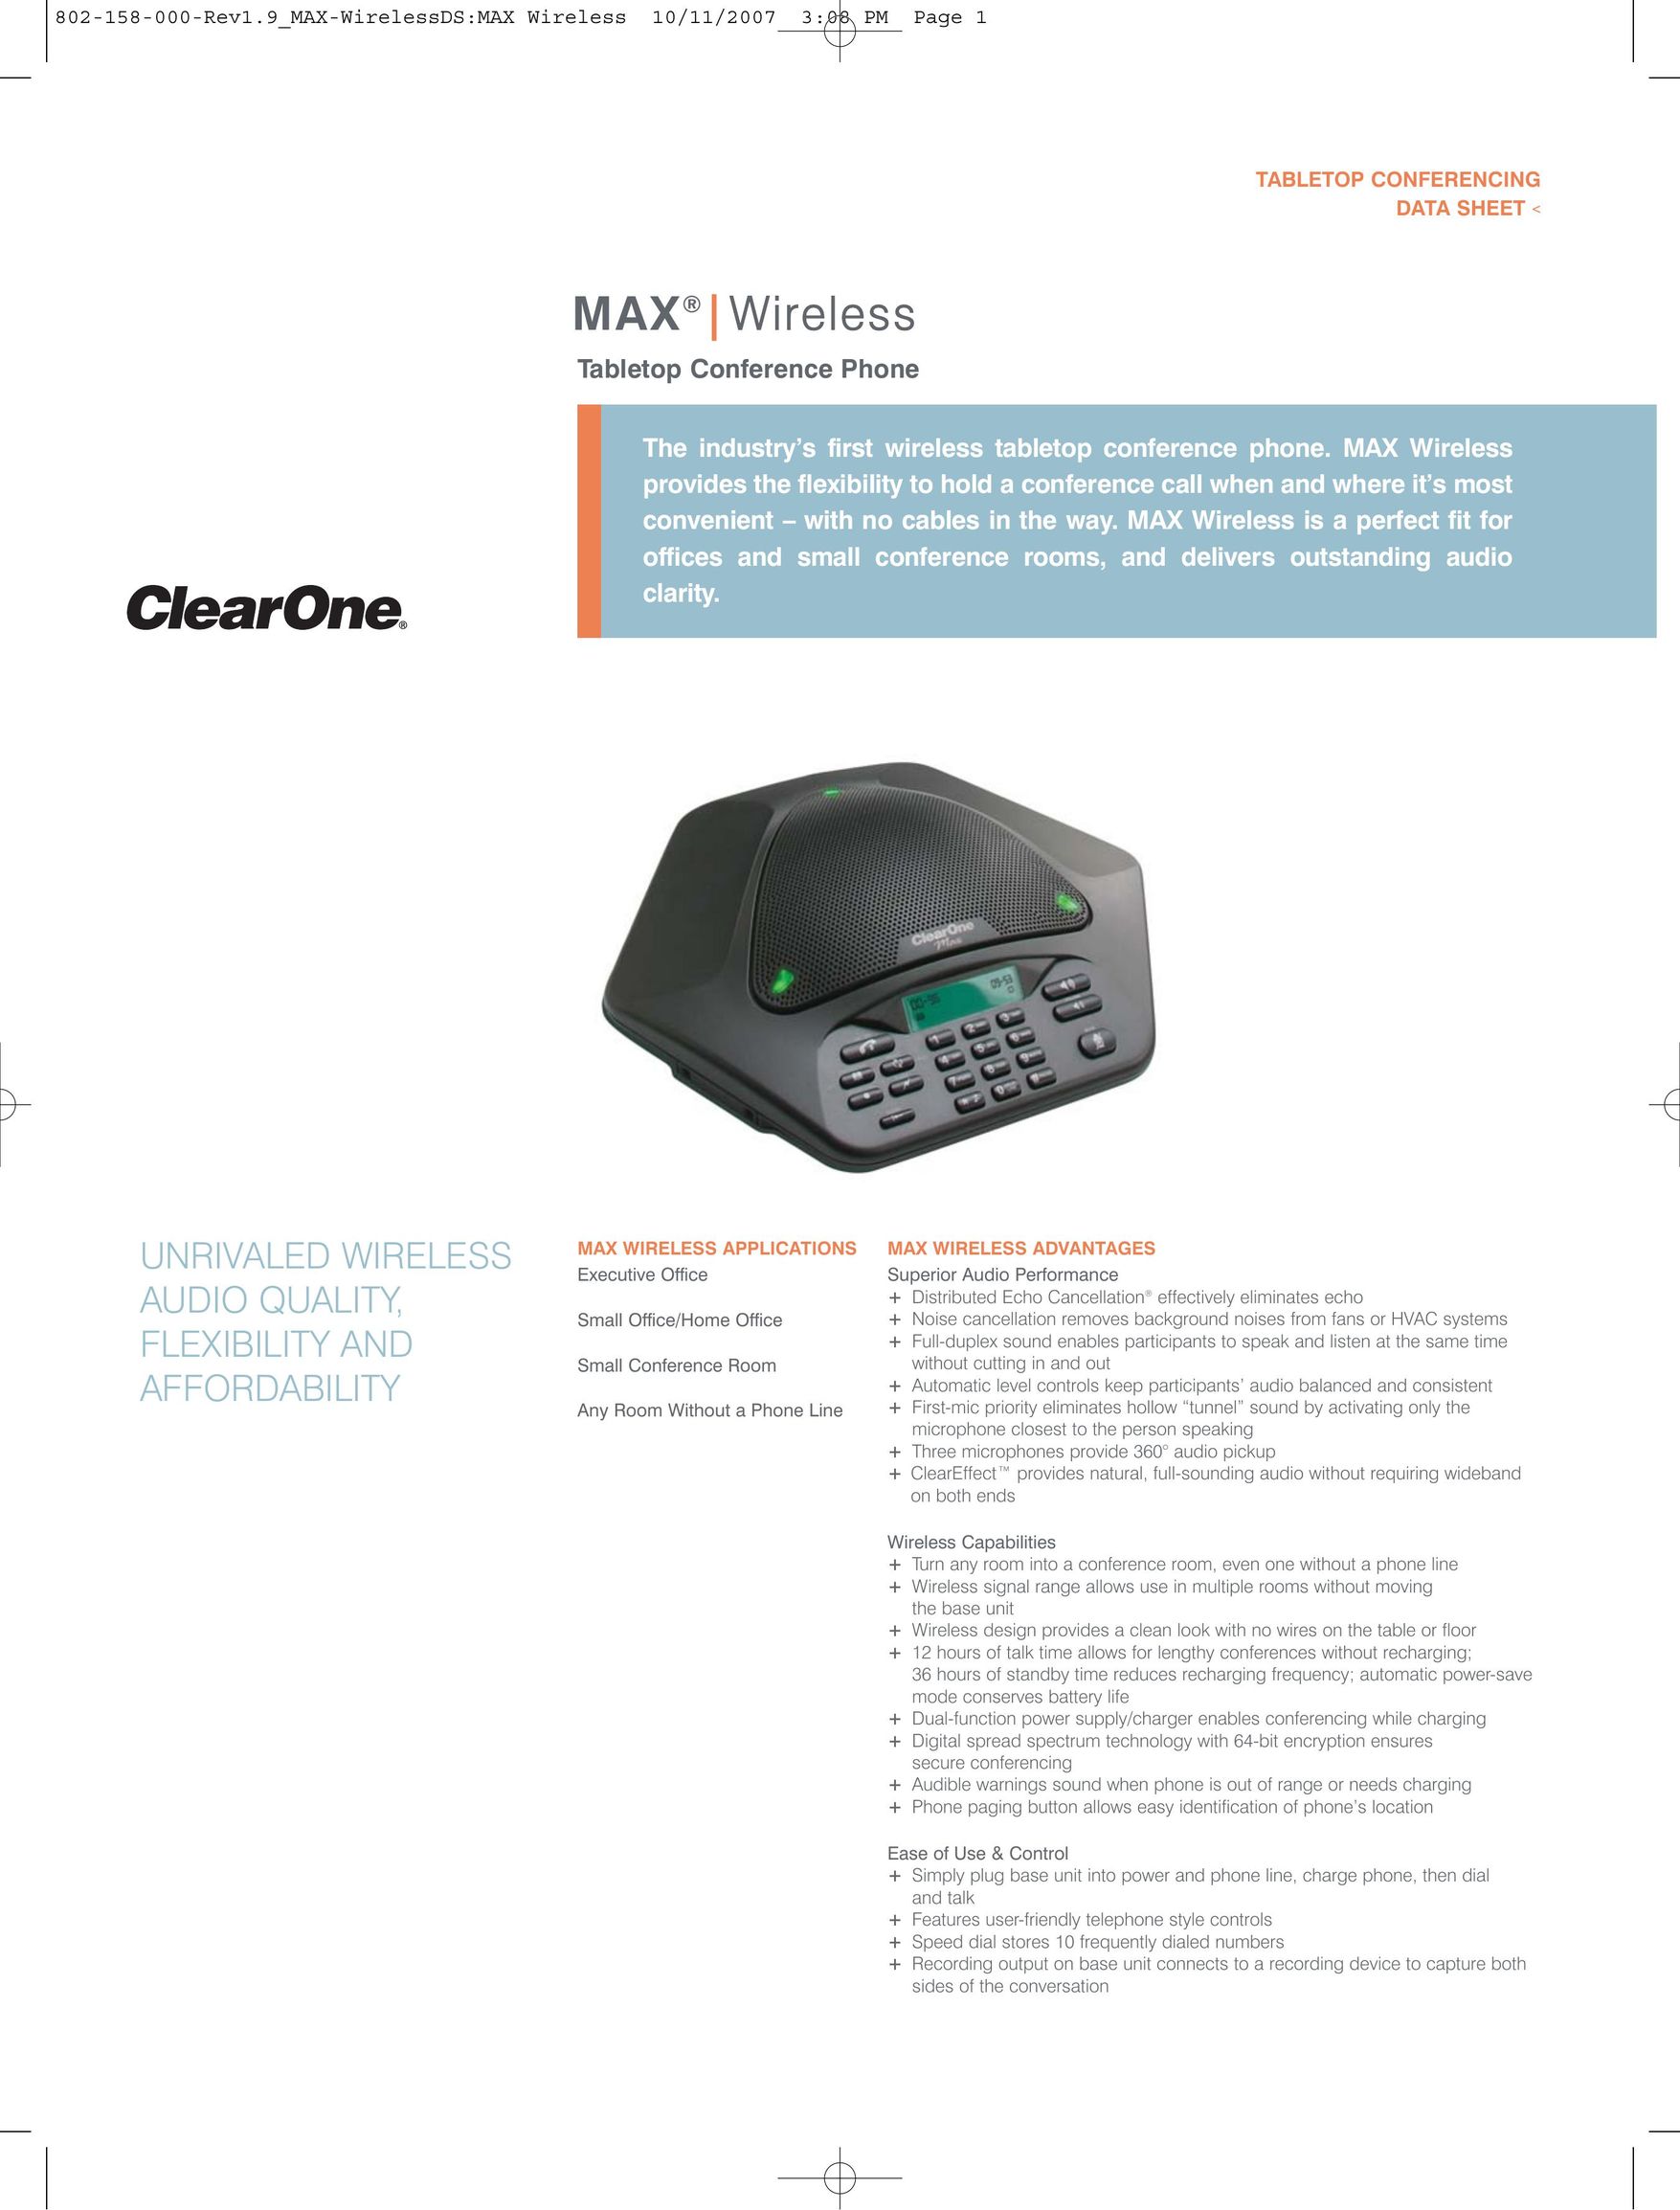 ClearOne comm 910-158-276 Conference Phone User Manual